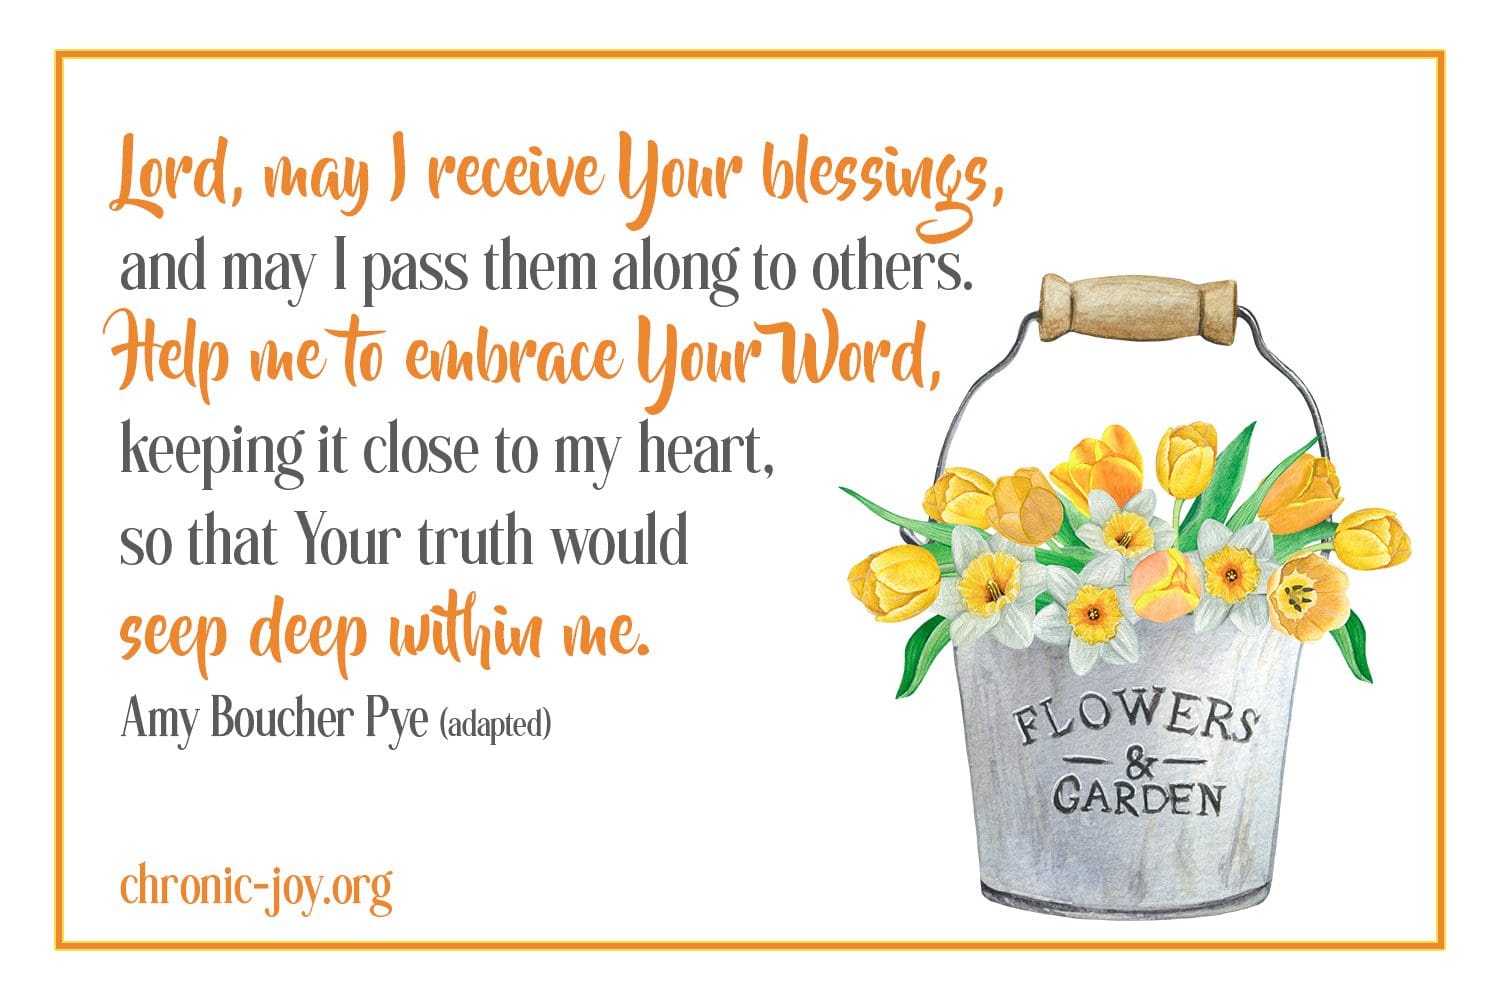 "Lord, may I receive Your blessings, and may I pass them along to others. Help me to embrace Your Word, keeping it close to my heart, so that Your truth would seep deep within me." Amy Boucher Pye (edited)